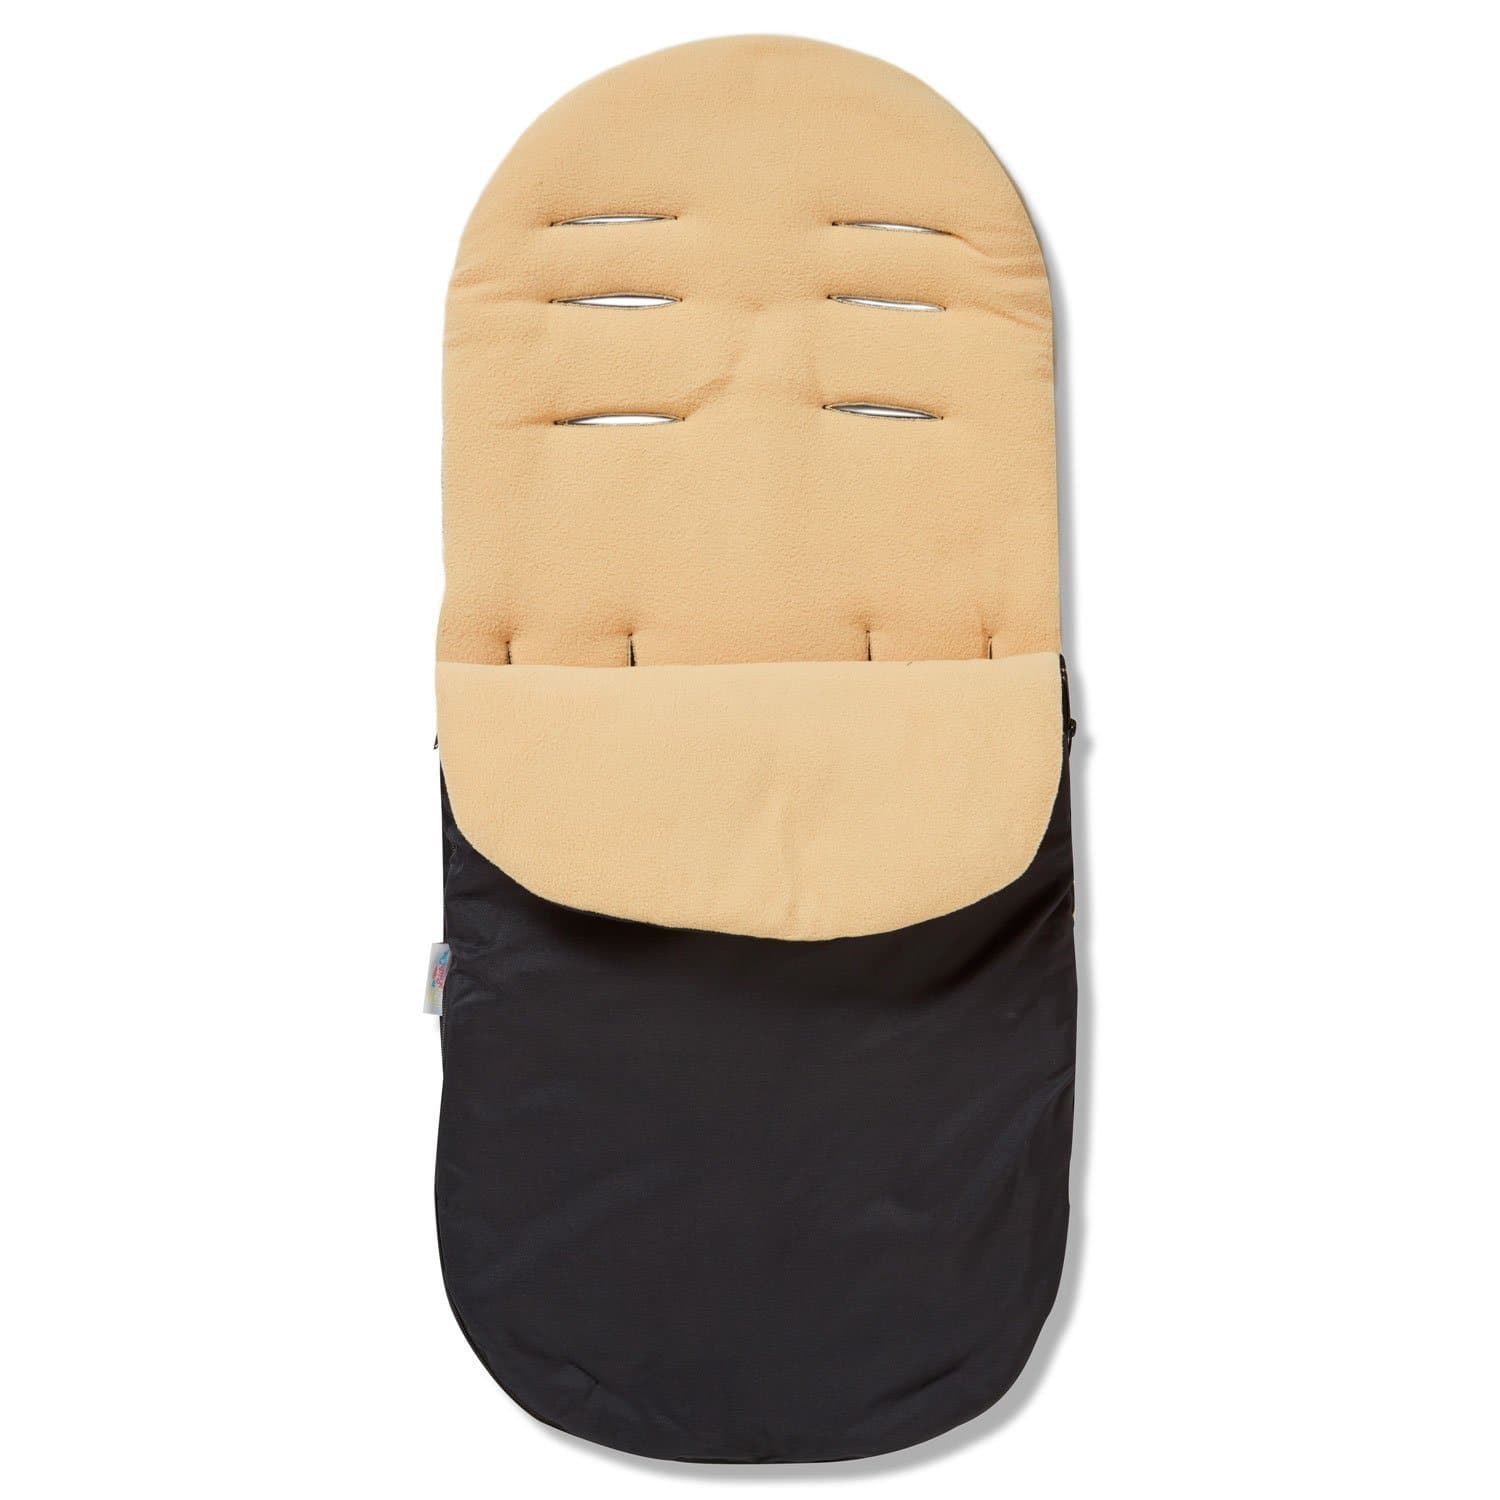 Footmuff / Cosy Toes Compatible with Gesslein - Sand / Fits All Models | For Your Little One